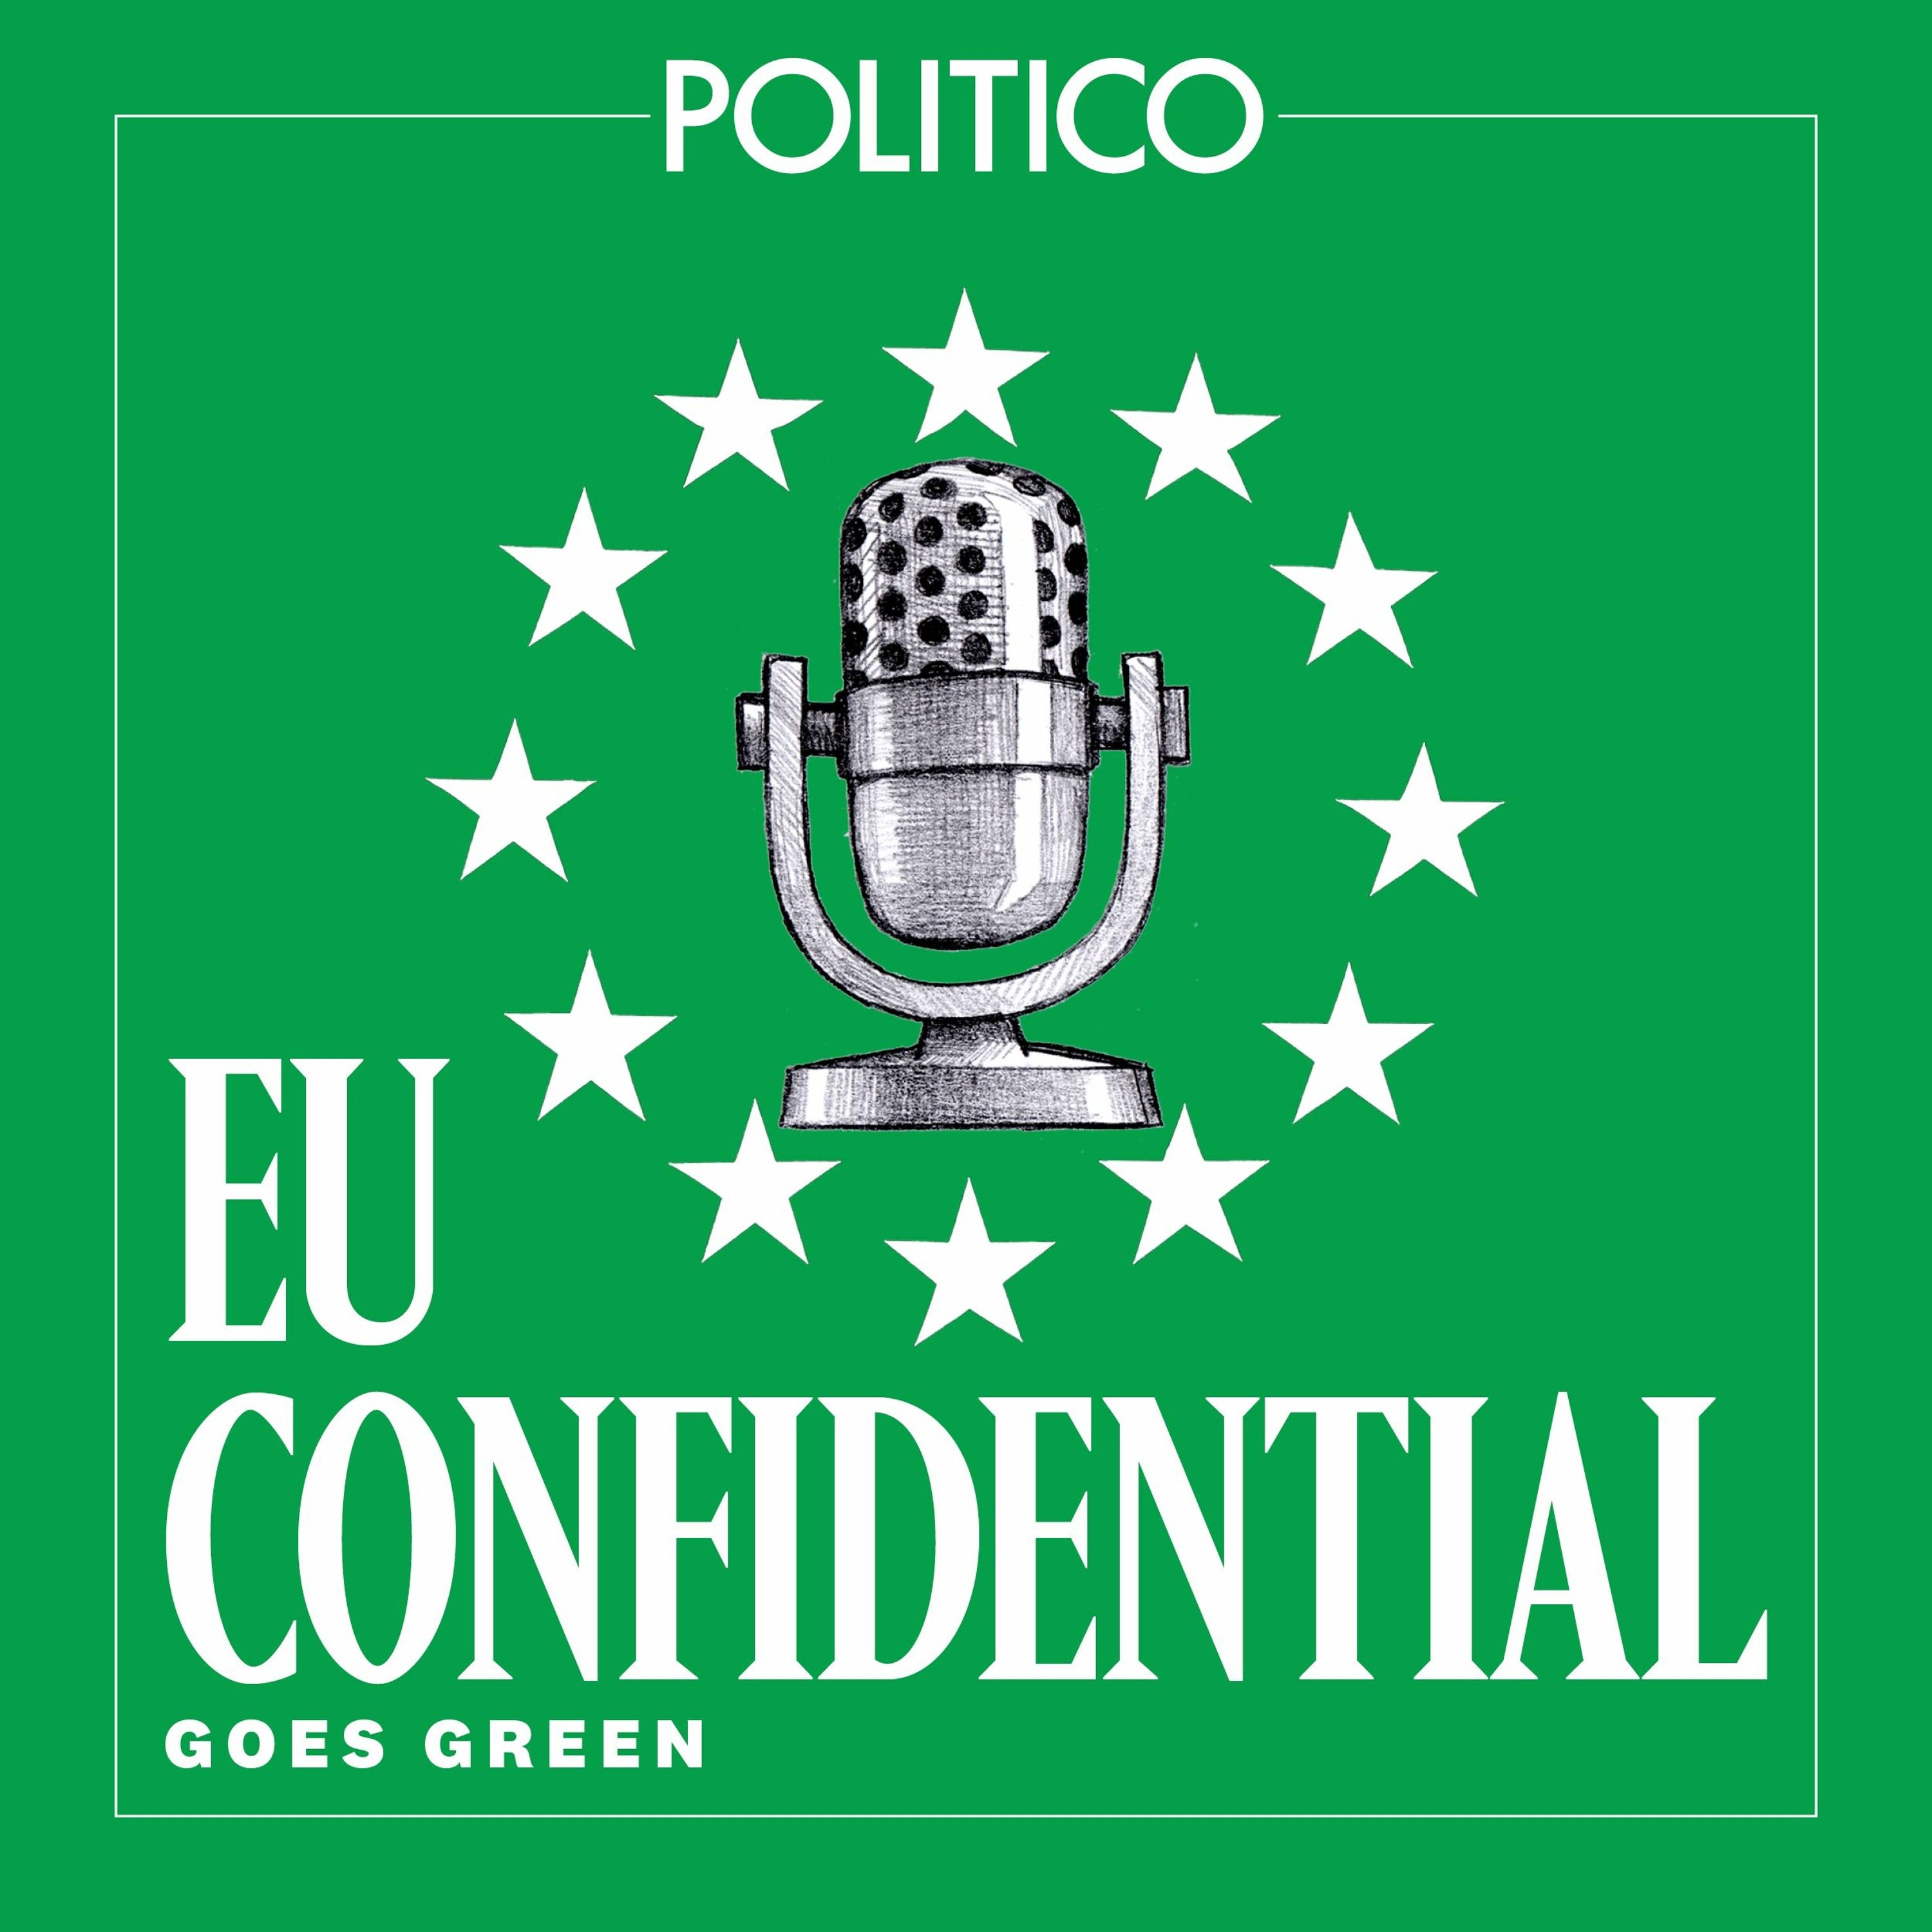 Ep 116, presented by Bayer: Swedish Enviro Minister Isabella Lövin — Commission’s Green New Deal